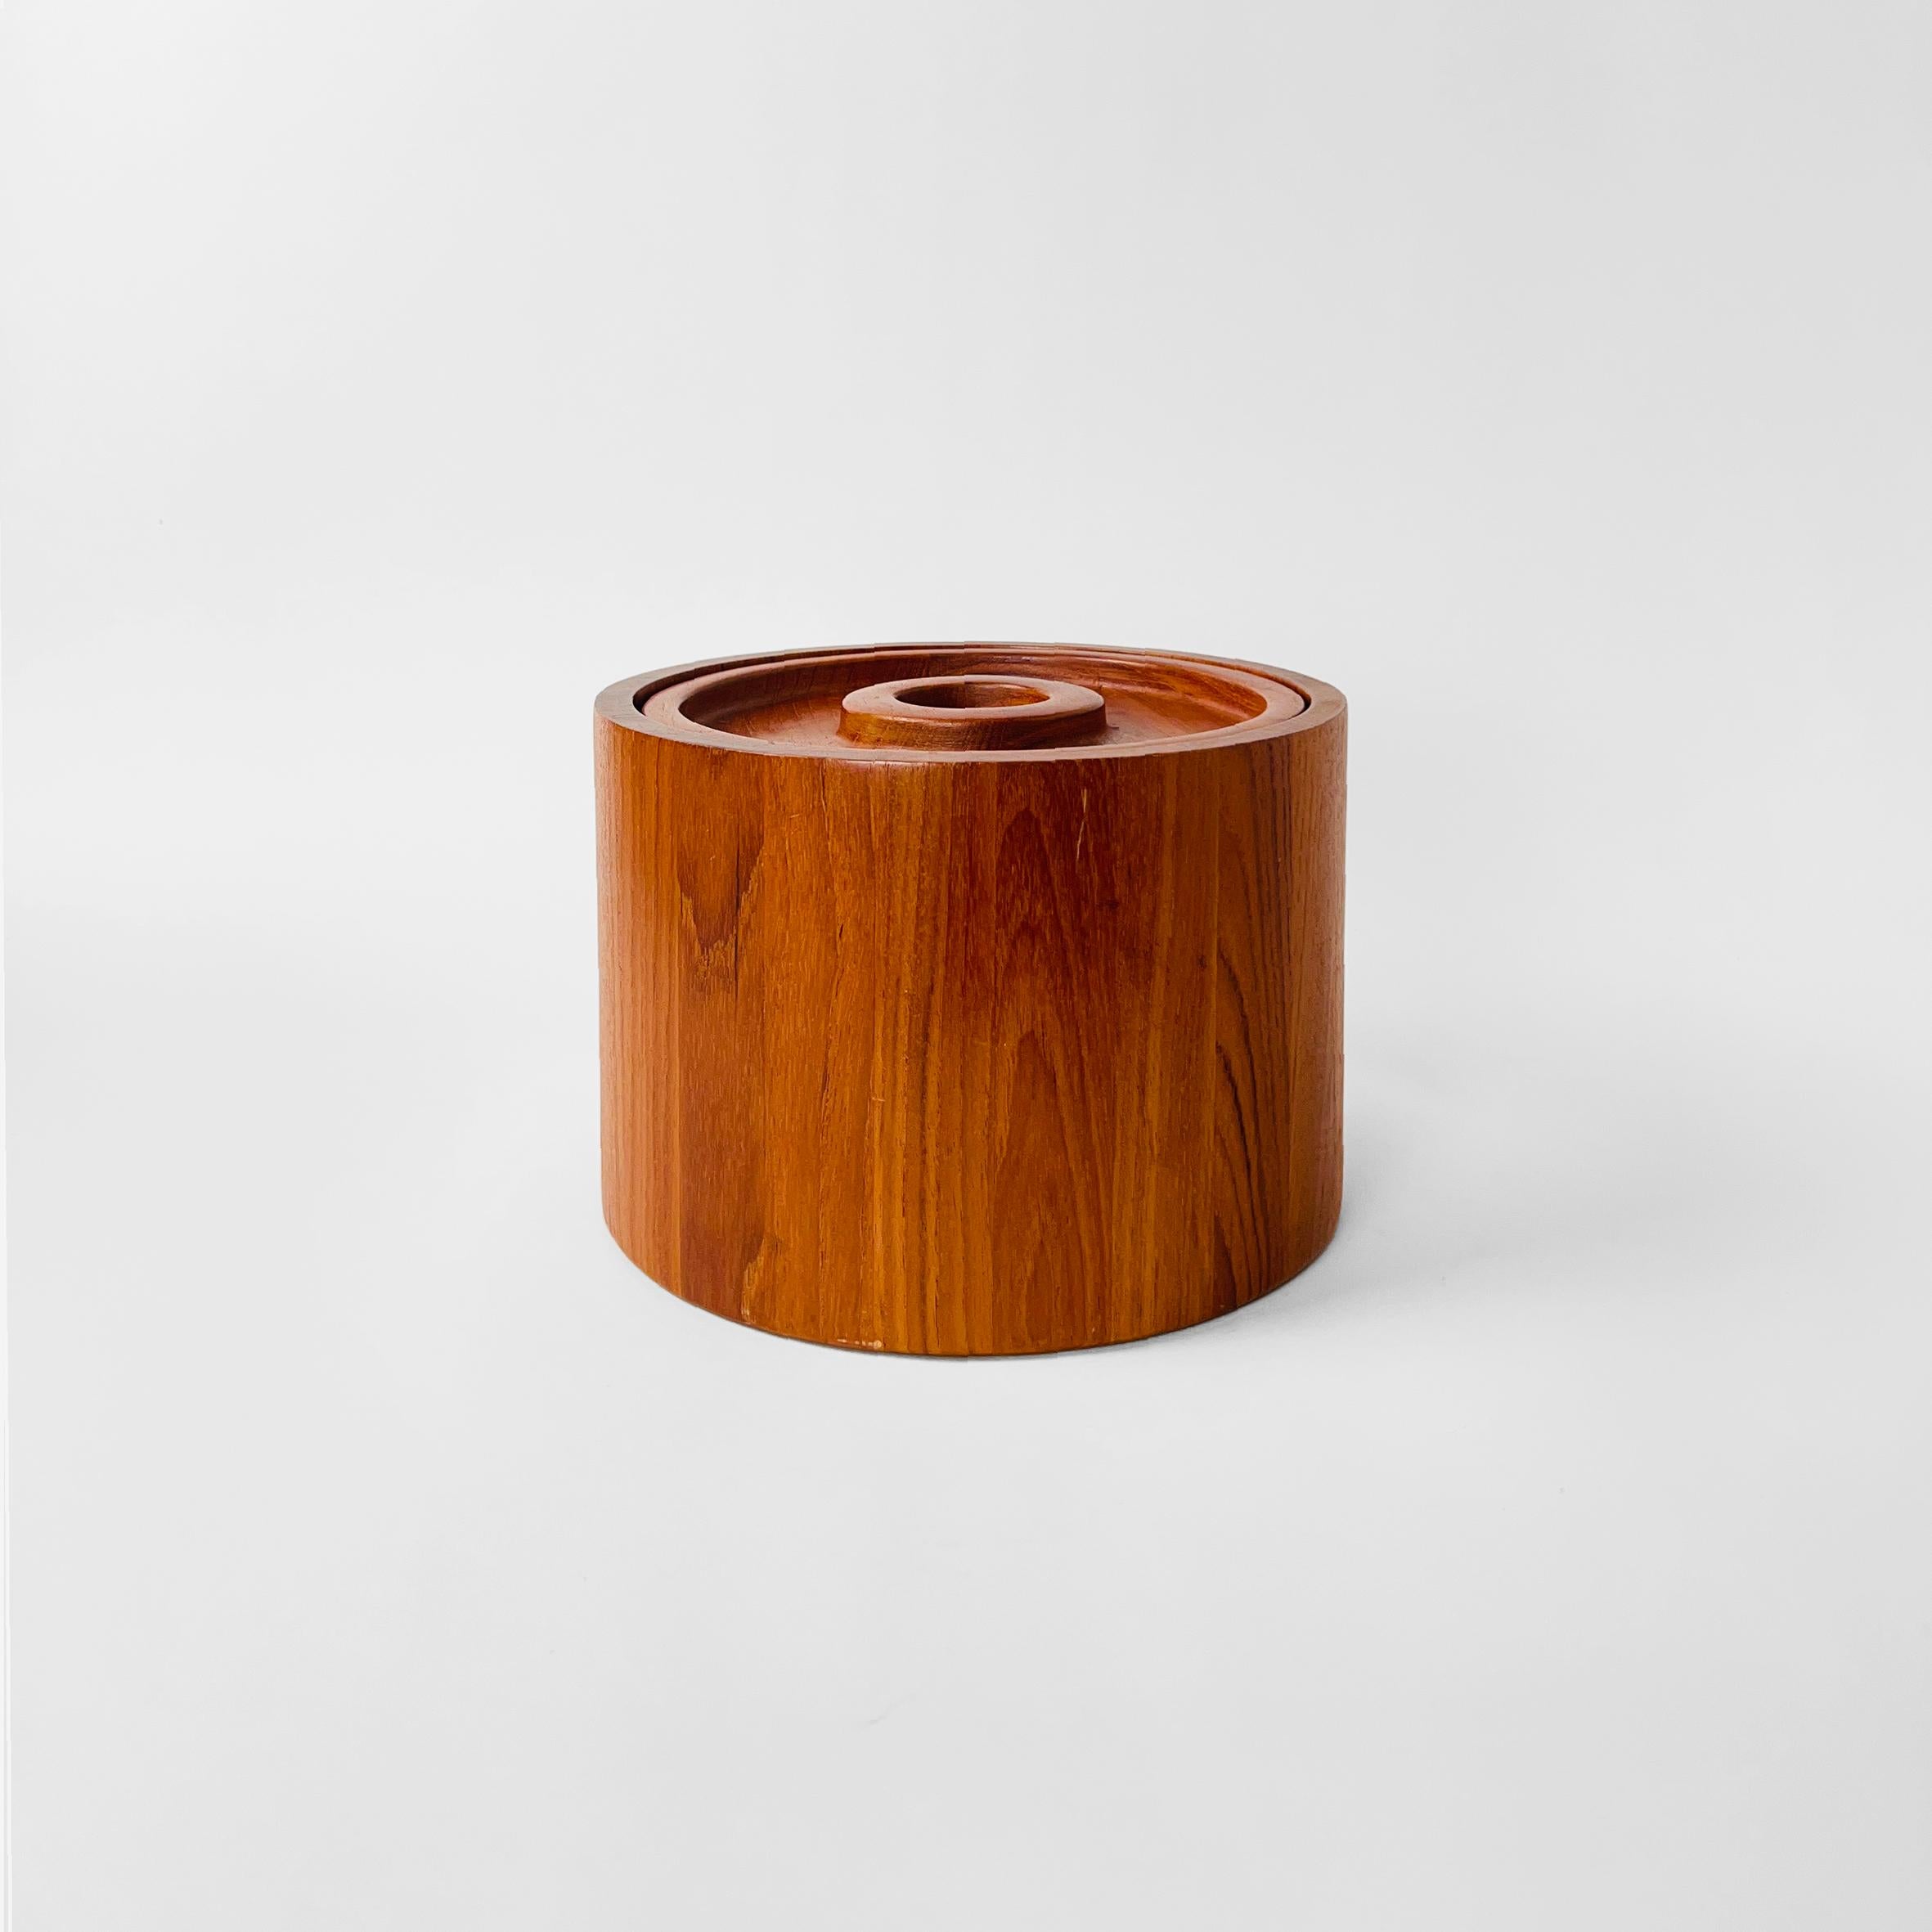 Teak ice bucket made of staved teak with an black plastic liner. Designed by Jens Quistgaard, a Danish sculptor and industrial designer, in the late 1970s for Dansk Designs.